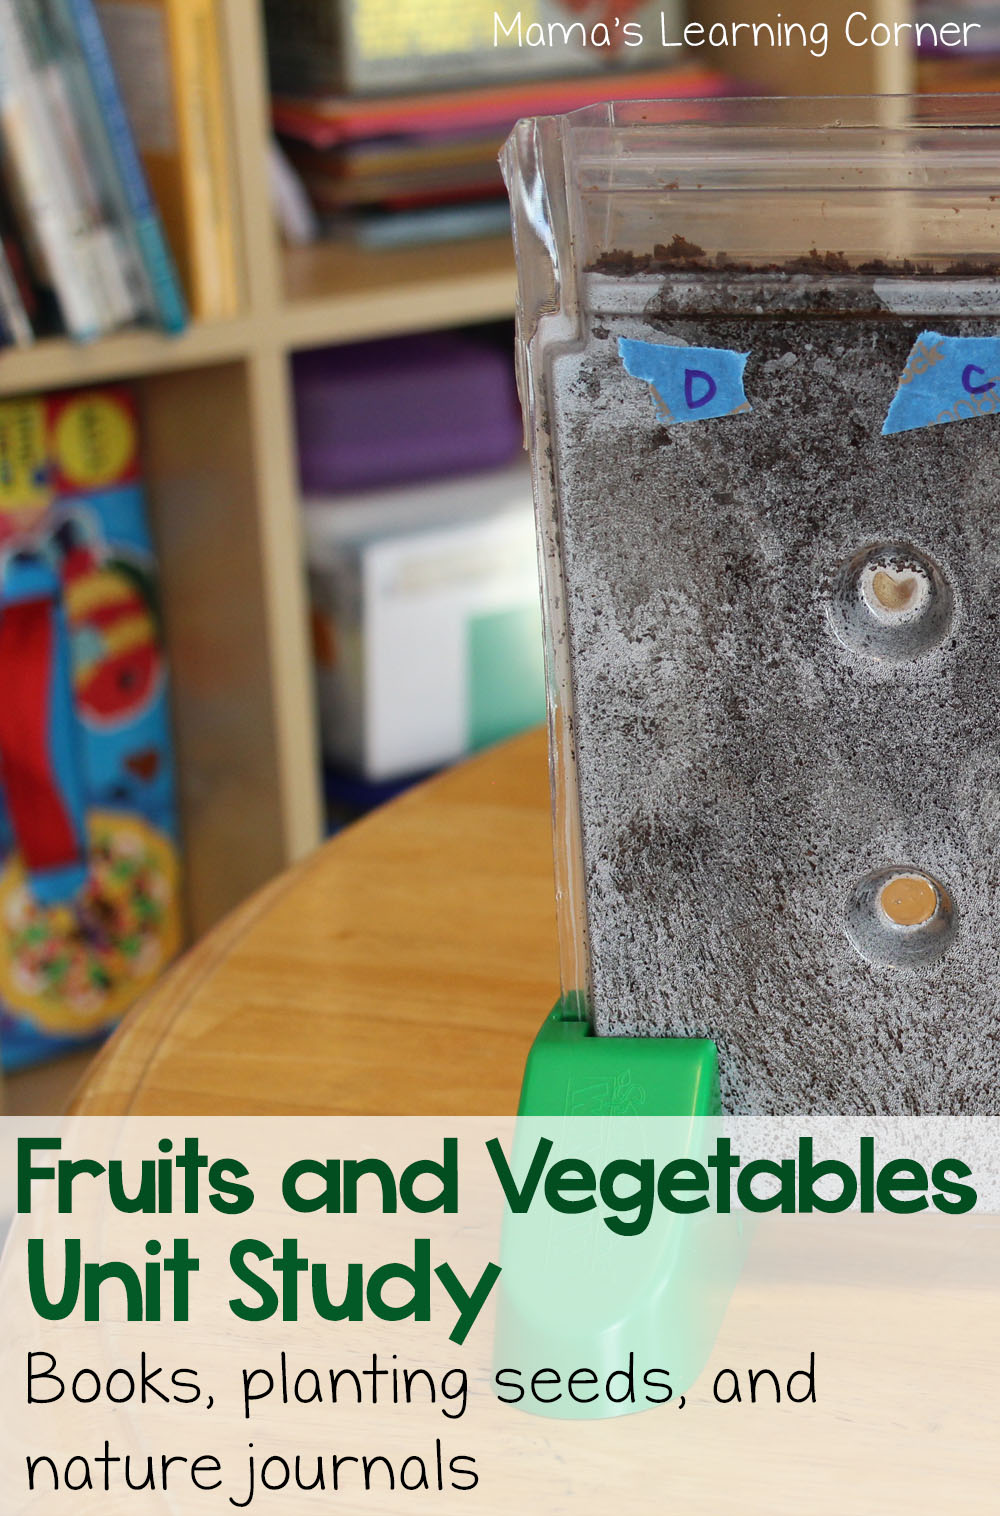 Fruits and Vegetables Unit Study: Planting Seeds and Nature Journals